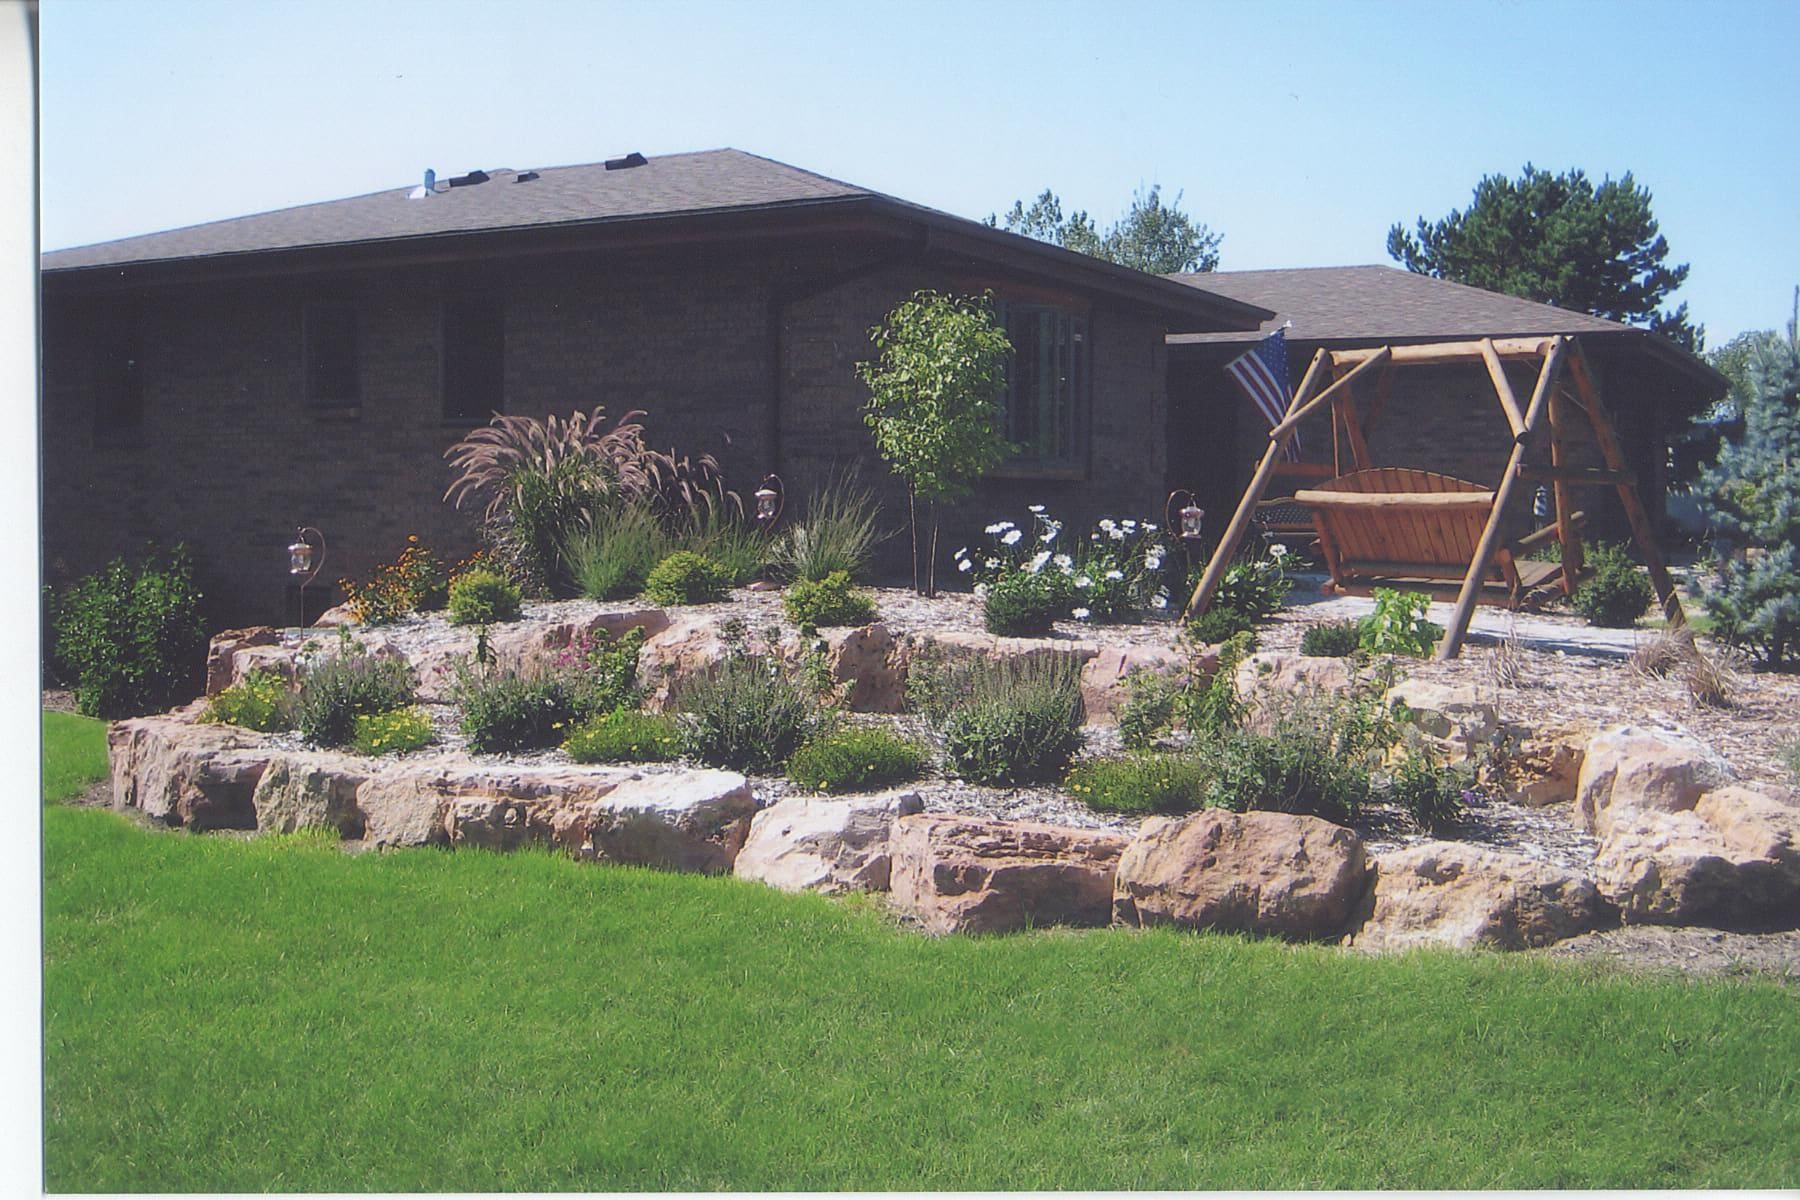 Pahl’s Plant Installation in Prior Lake